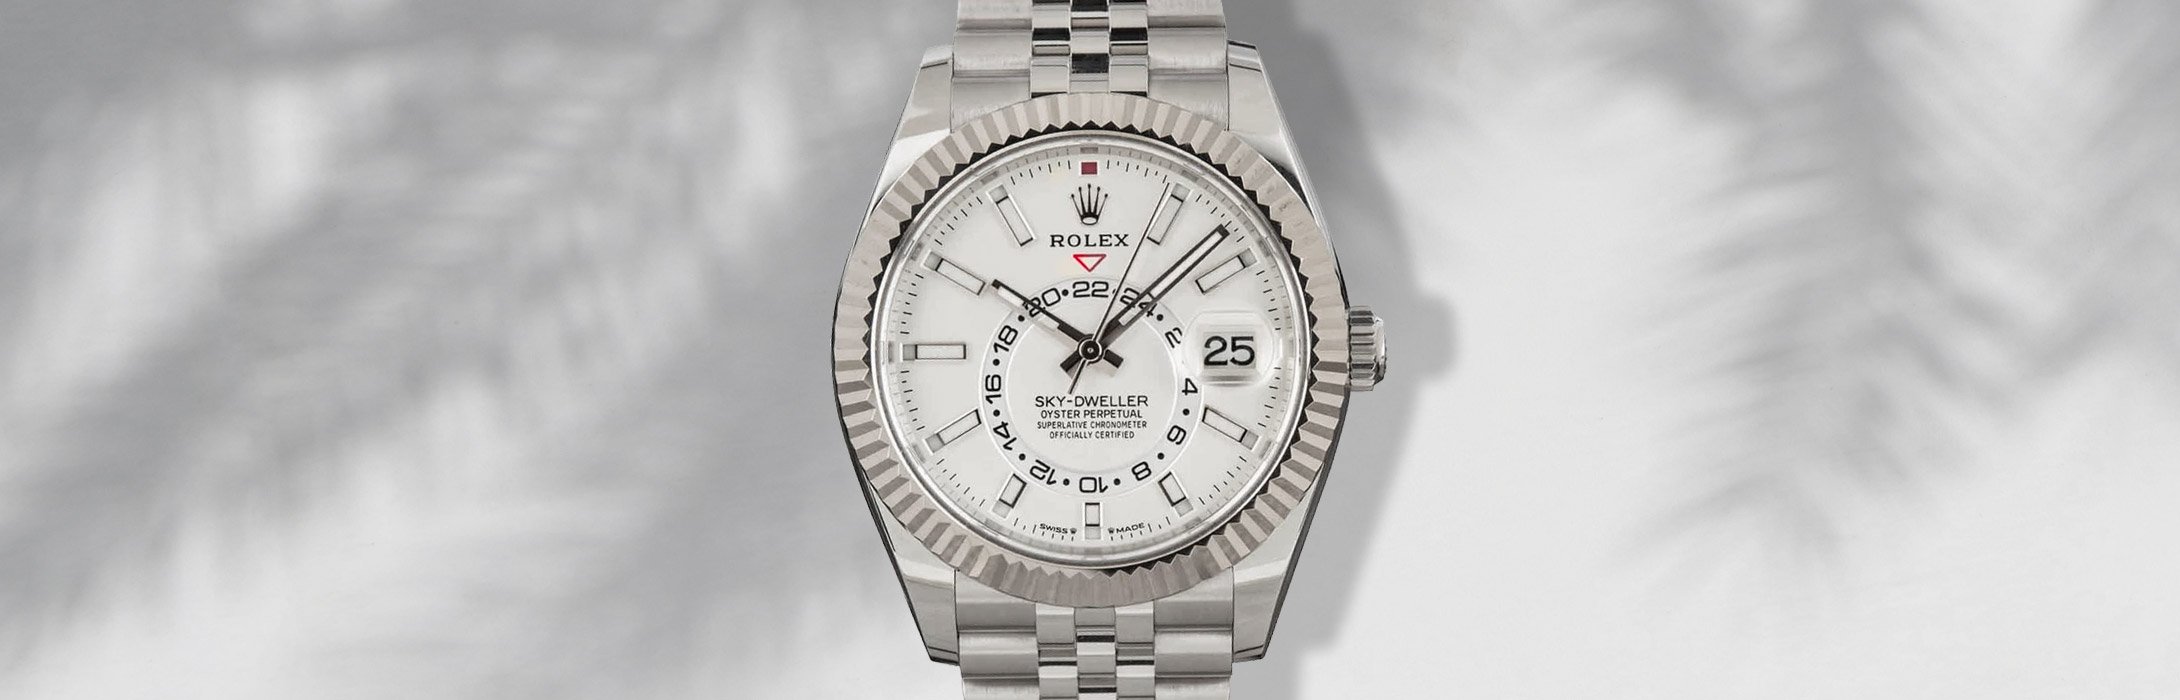 Rolex Sky-Dweller 336934 Ultimate Buying Guide